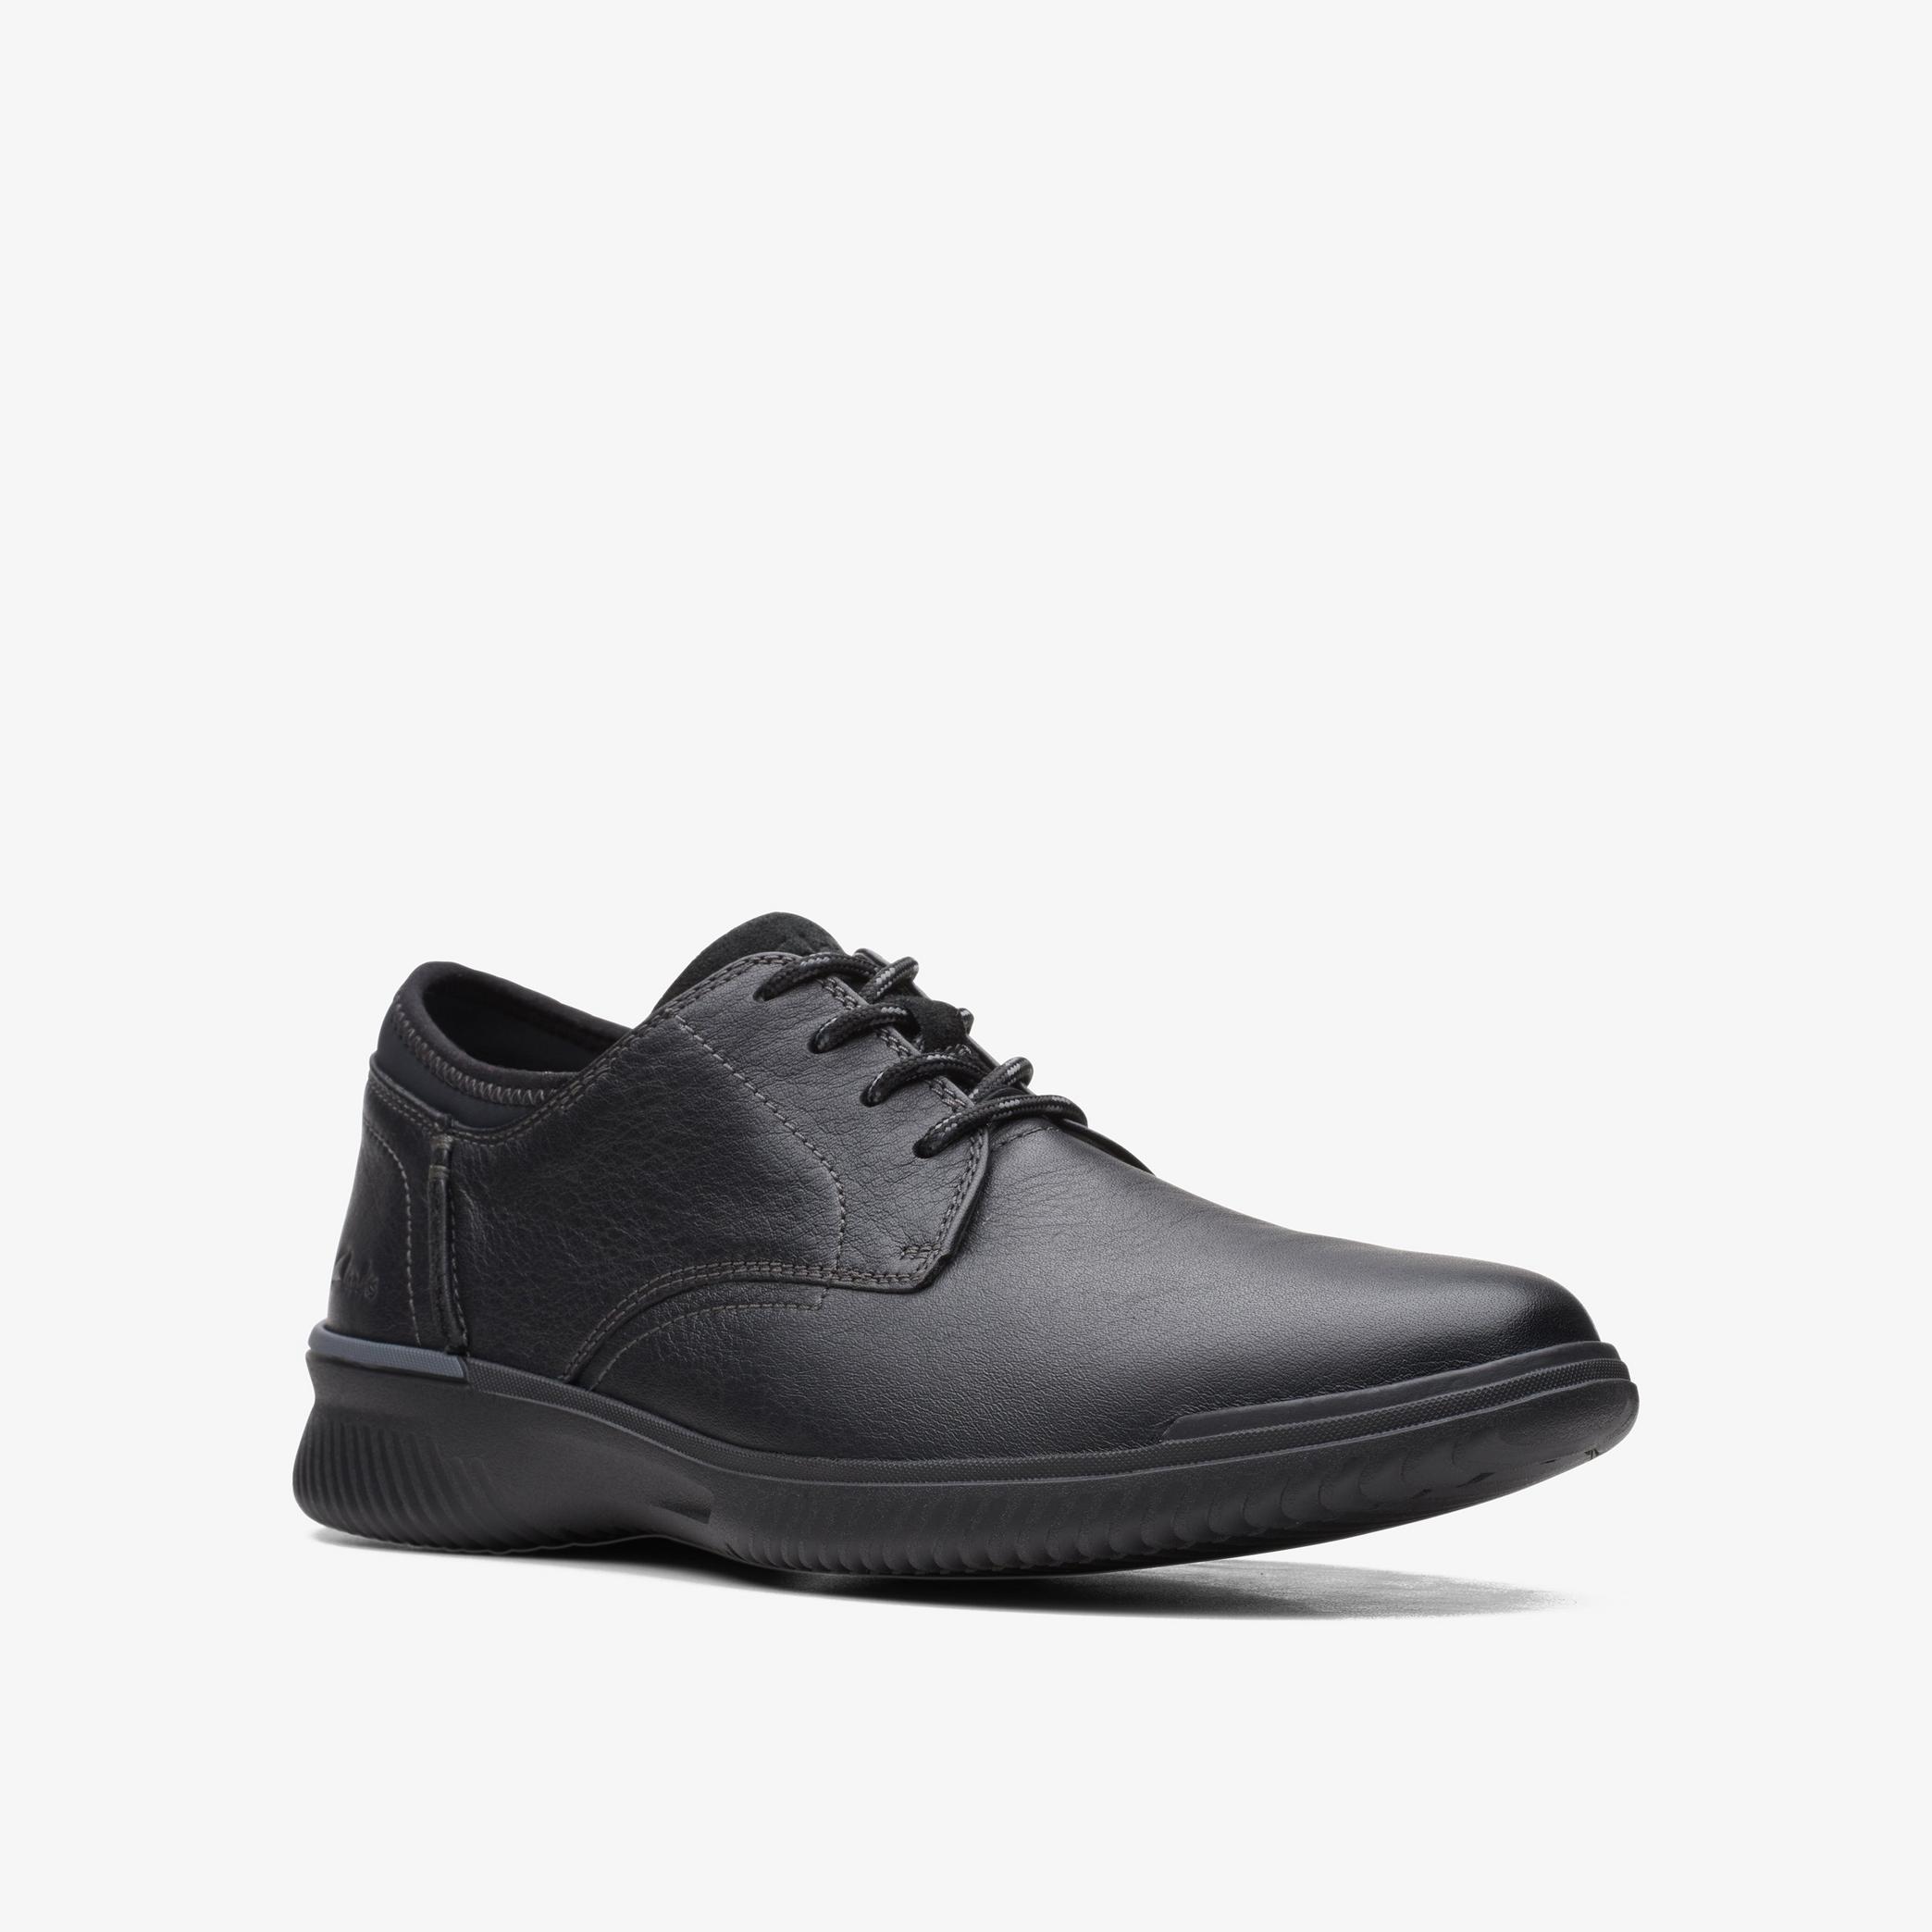 Donaway Plain Black Leather Shoes, view 3 of 6